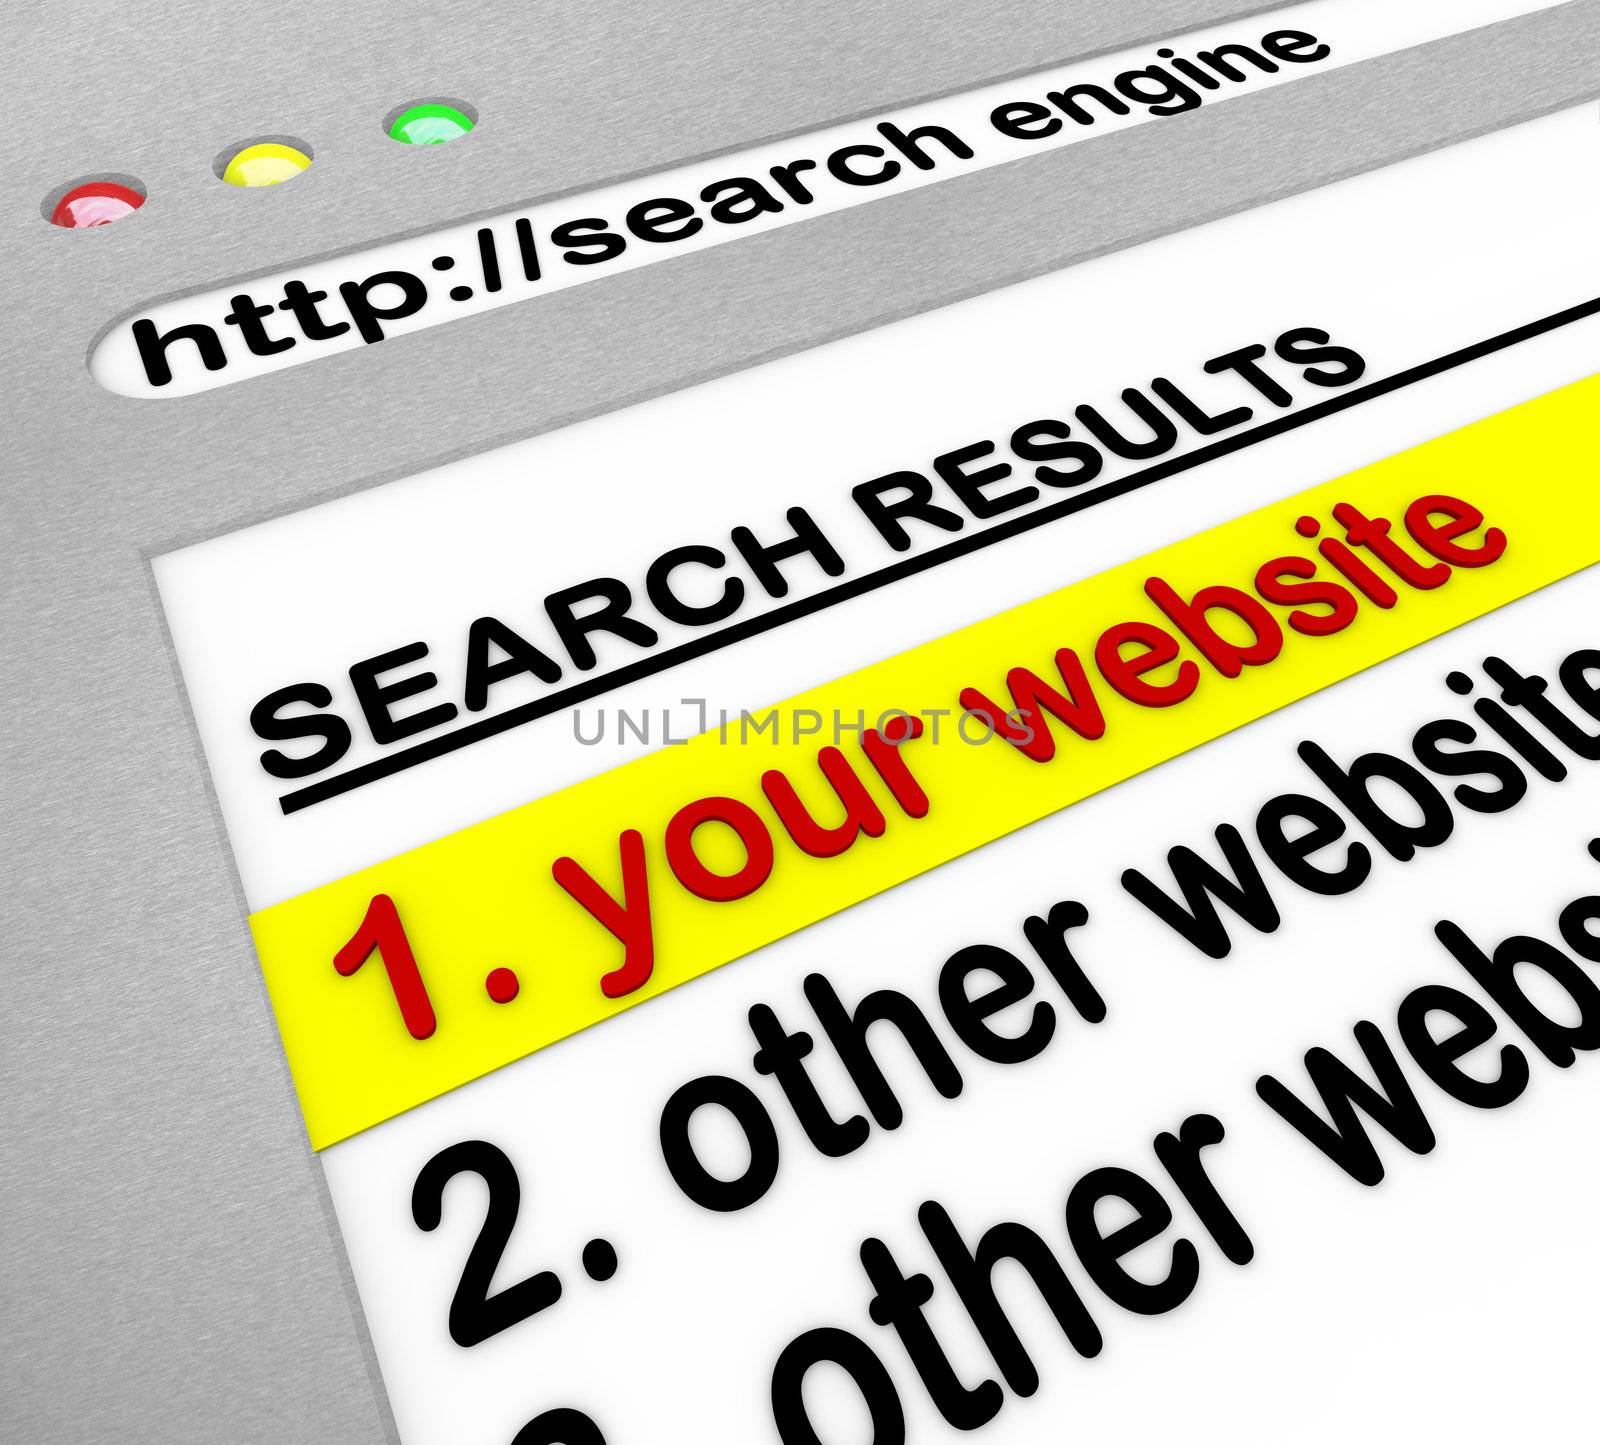 A search engine browser window shows your website as the top result